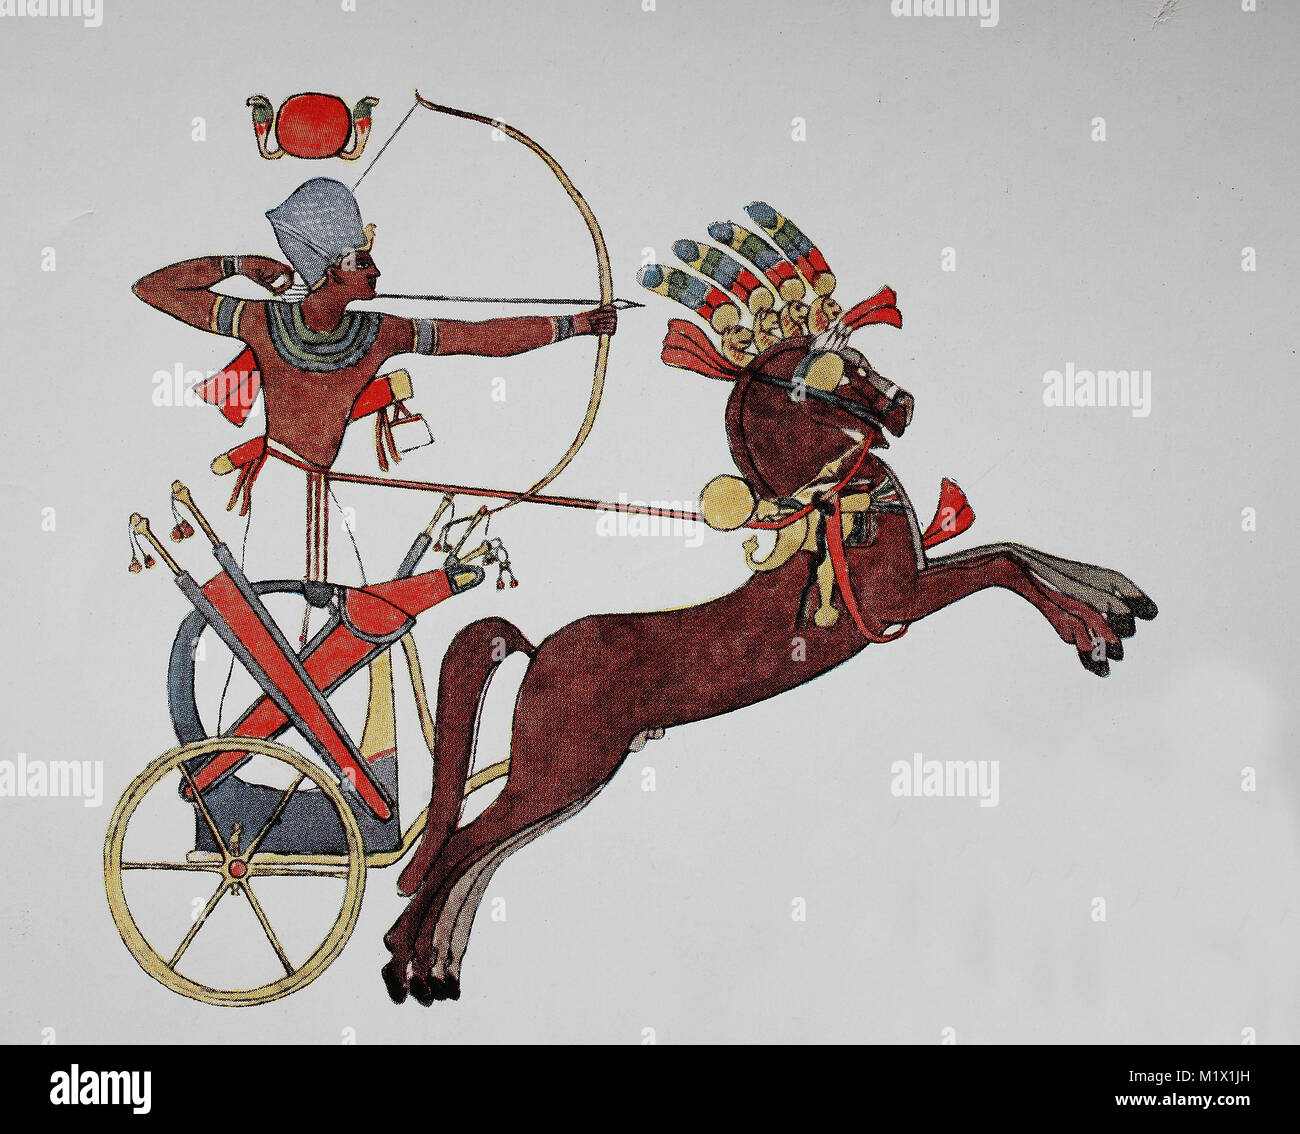 Clothing in Ancient Egypt, New Kingdom, Late Period, Ramesses, Ramses II, 1324-1258 BC, on the chariot, the king as an archer, digital improved reproduction of an original print from the 19th century Stock Photo